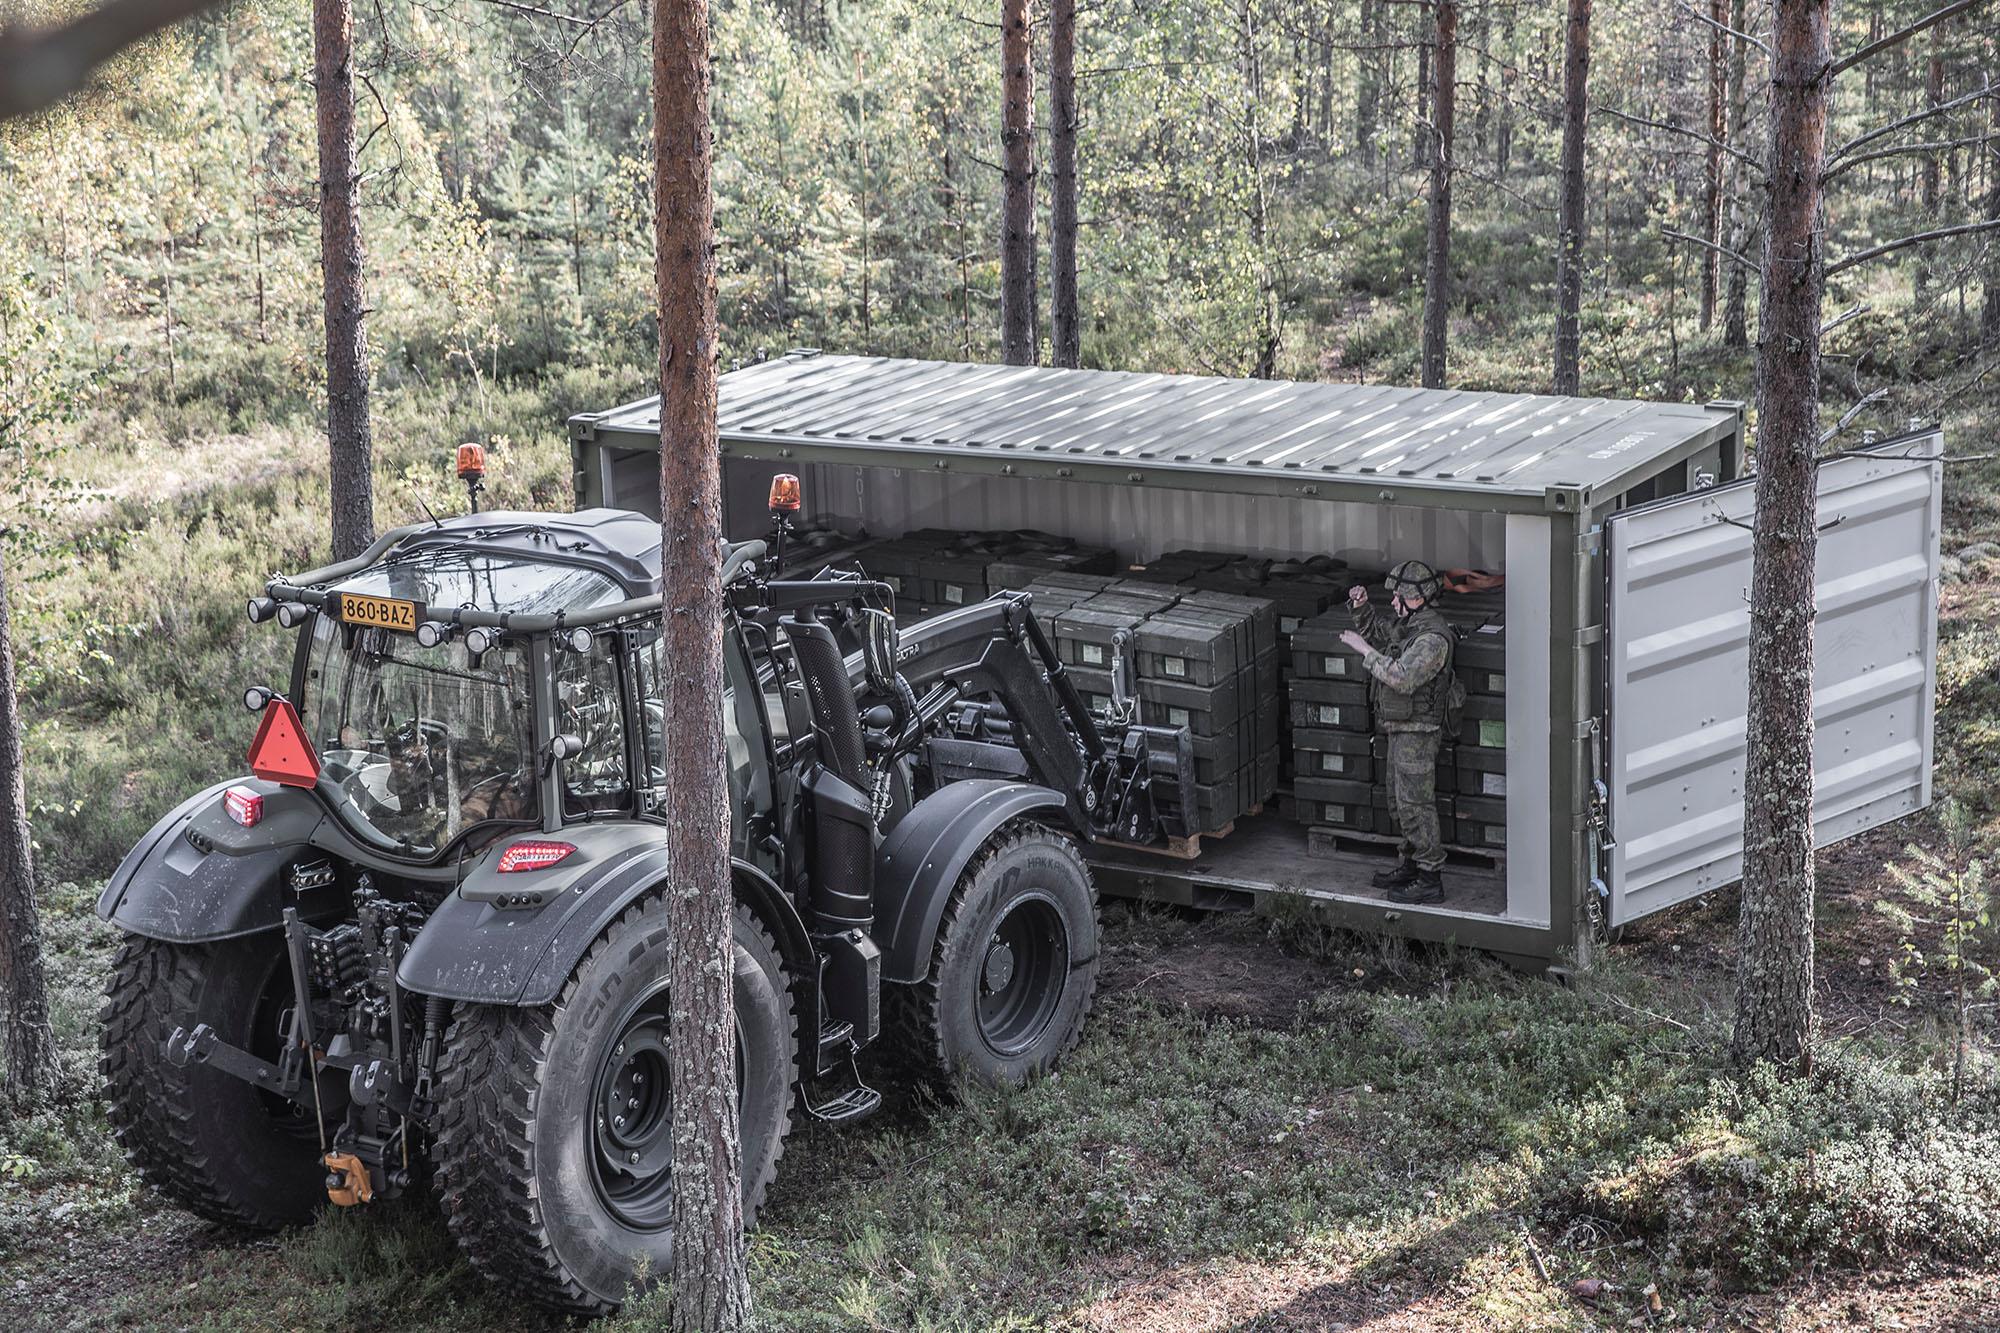 Valtra N174 tractor delivering supplies to Finnish troops in the field in containers